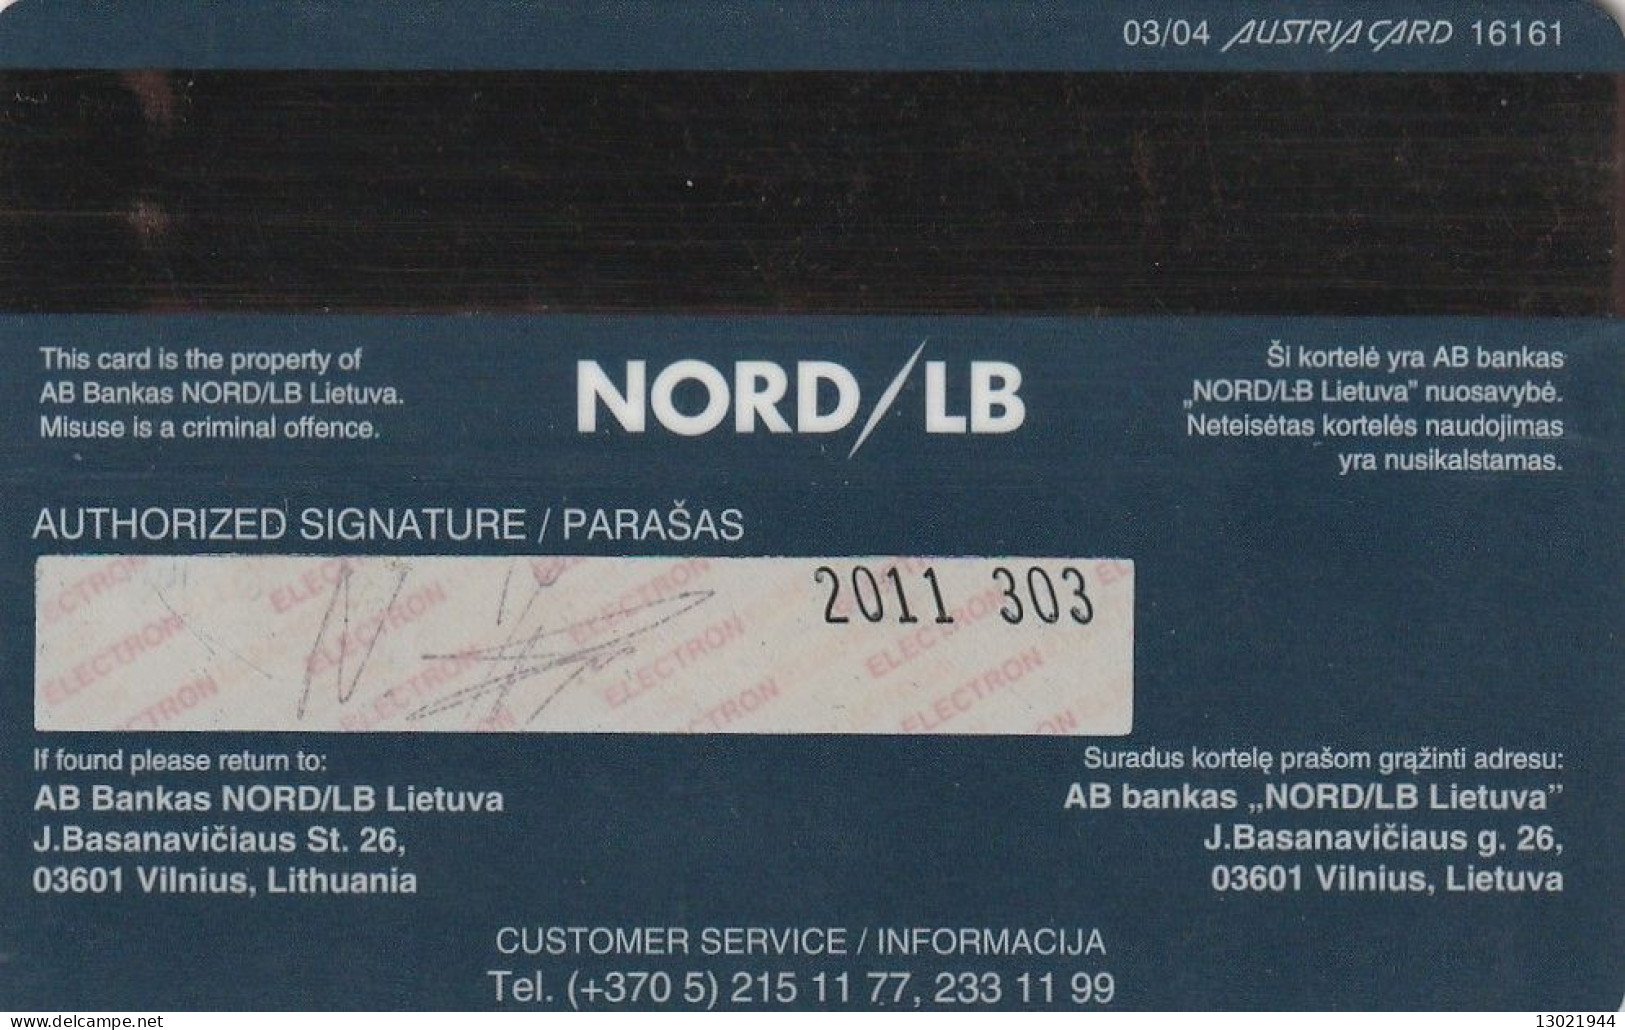 N. 4 LITUANIA BANK  CARDS  - POSSIBLE SALE OF SINGLE CARDS - Credit Cards (Exp. Date Min. 10 Years)